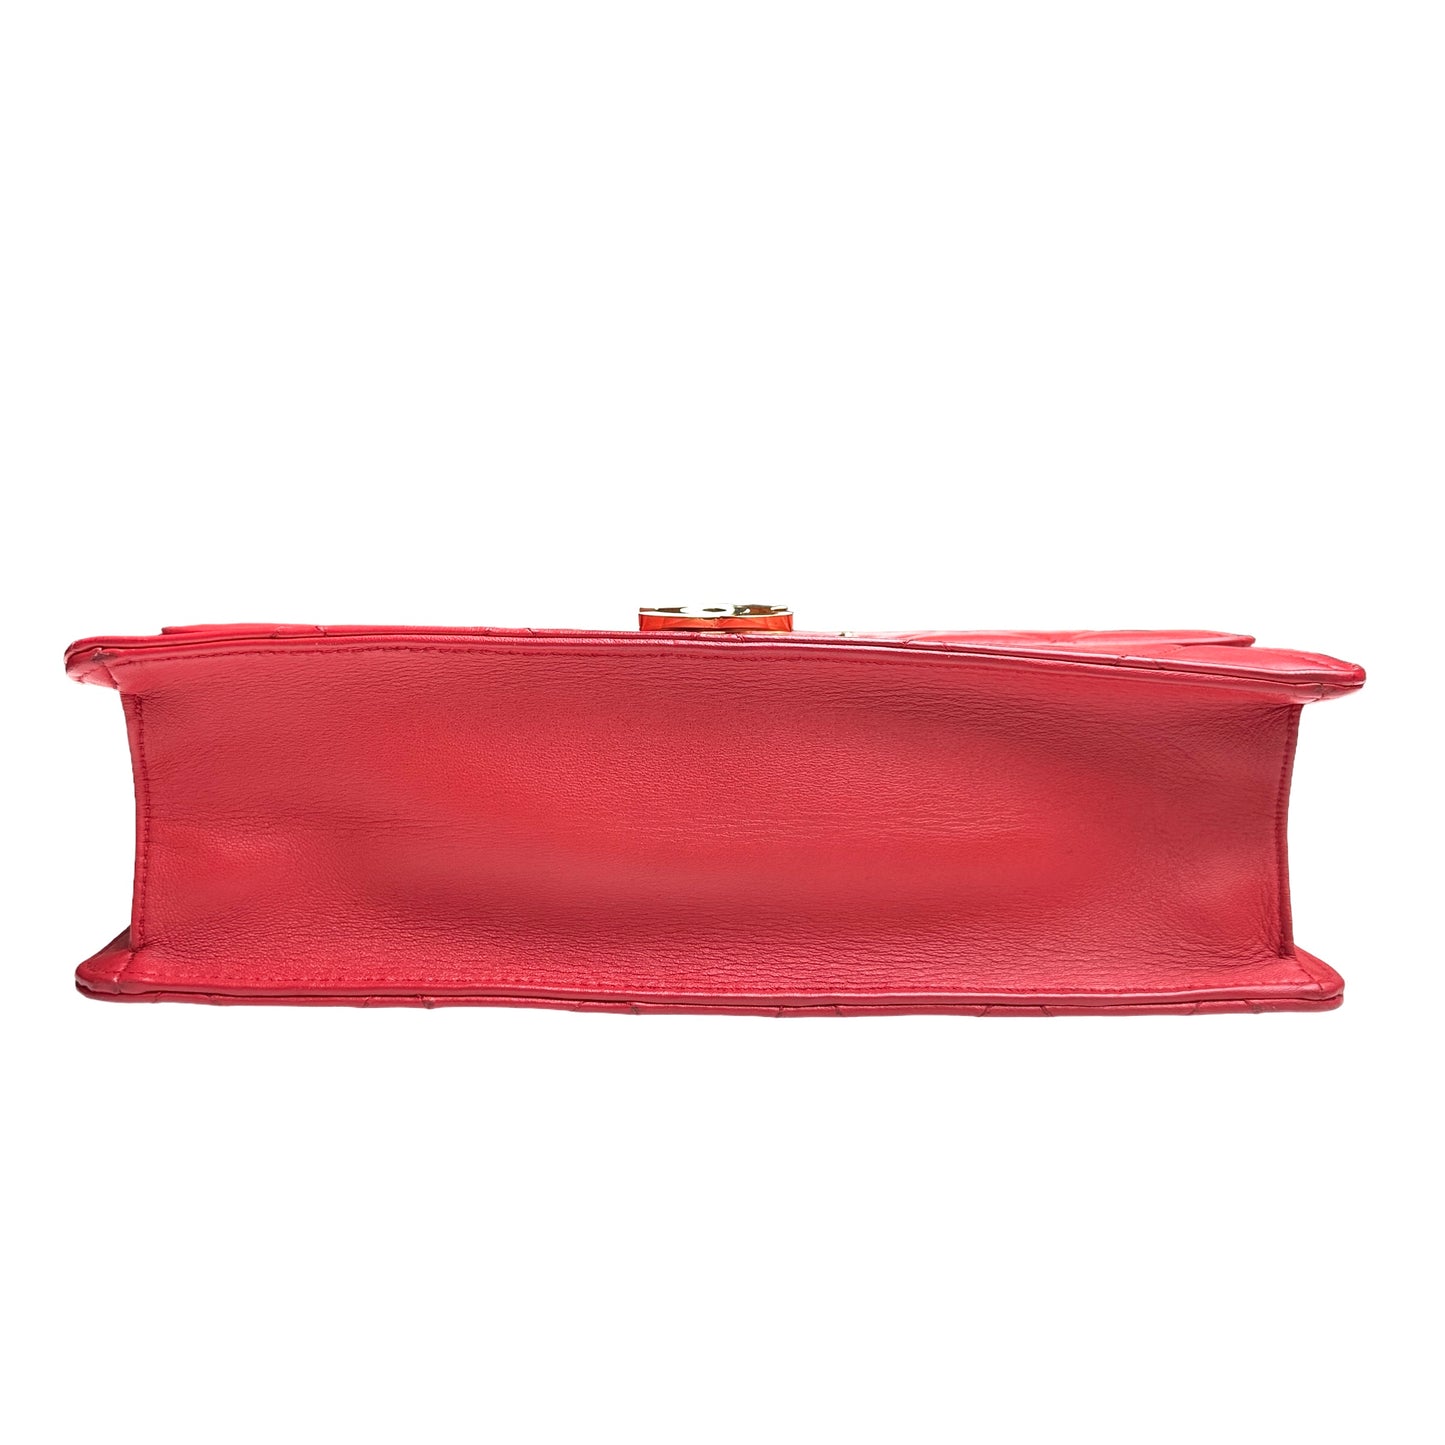 Red Flap with Gold Hardware Bag